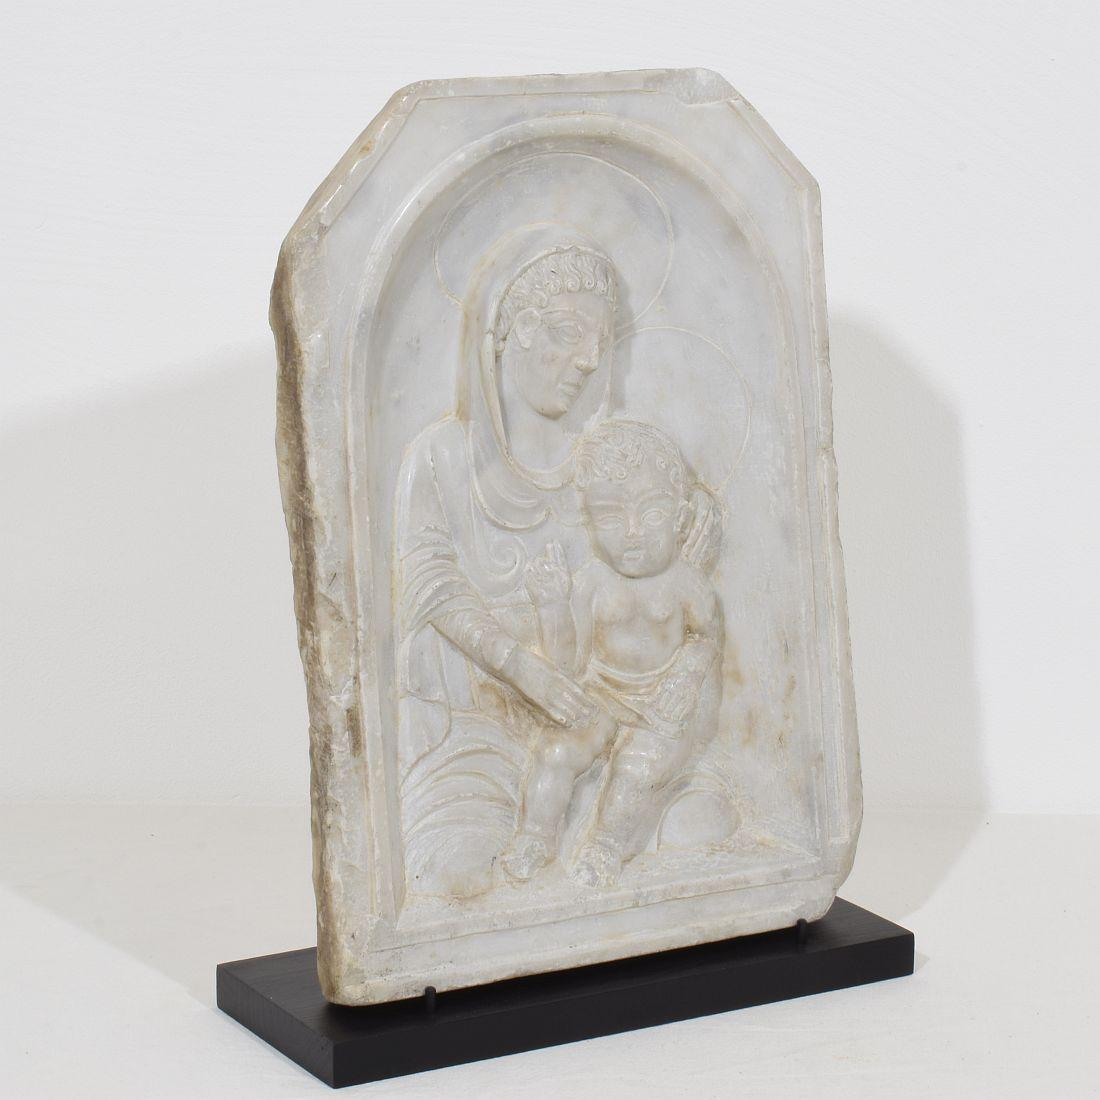 Hand-Carved Italian 17 Century Marble Panel with Madonna and Child